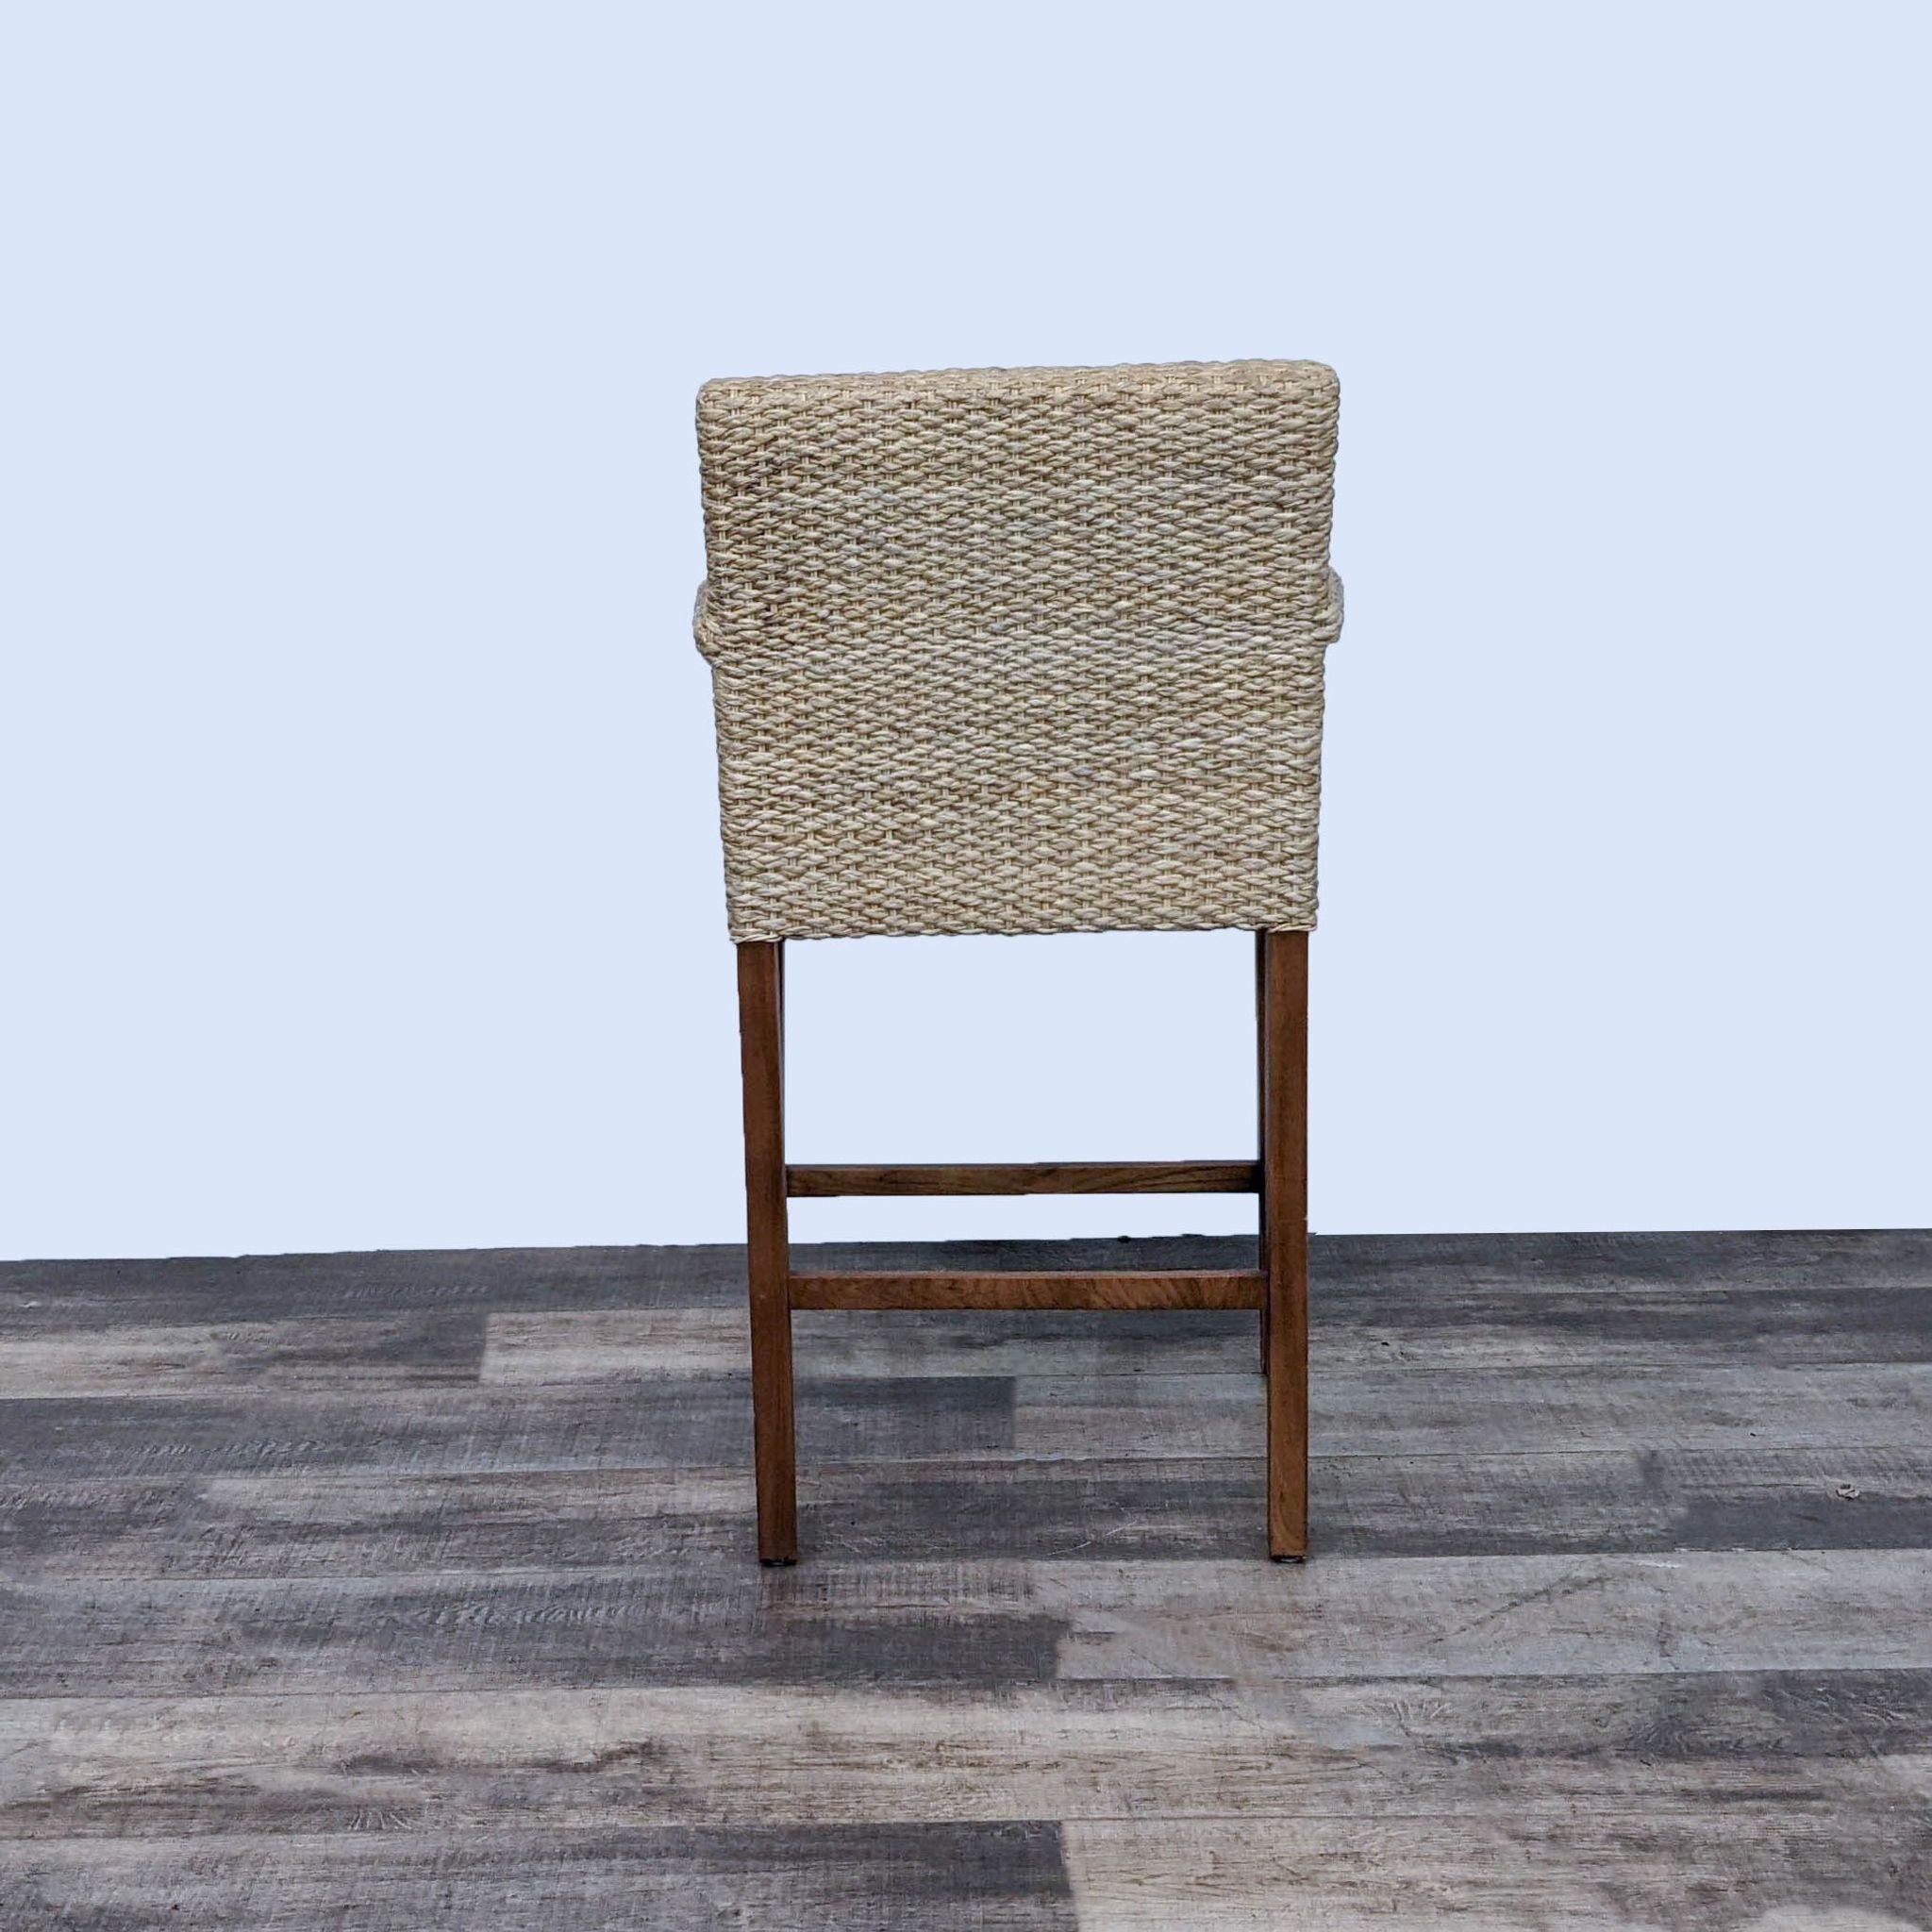 Reperch seagrass stool with green and blue plaid cushion on wooden frame, against a gray floor and white background.